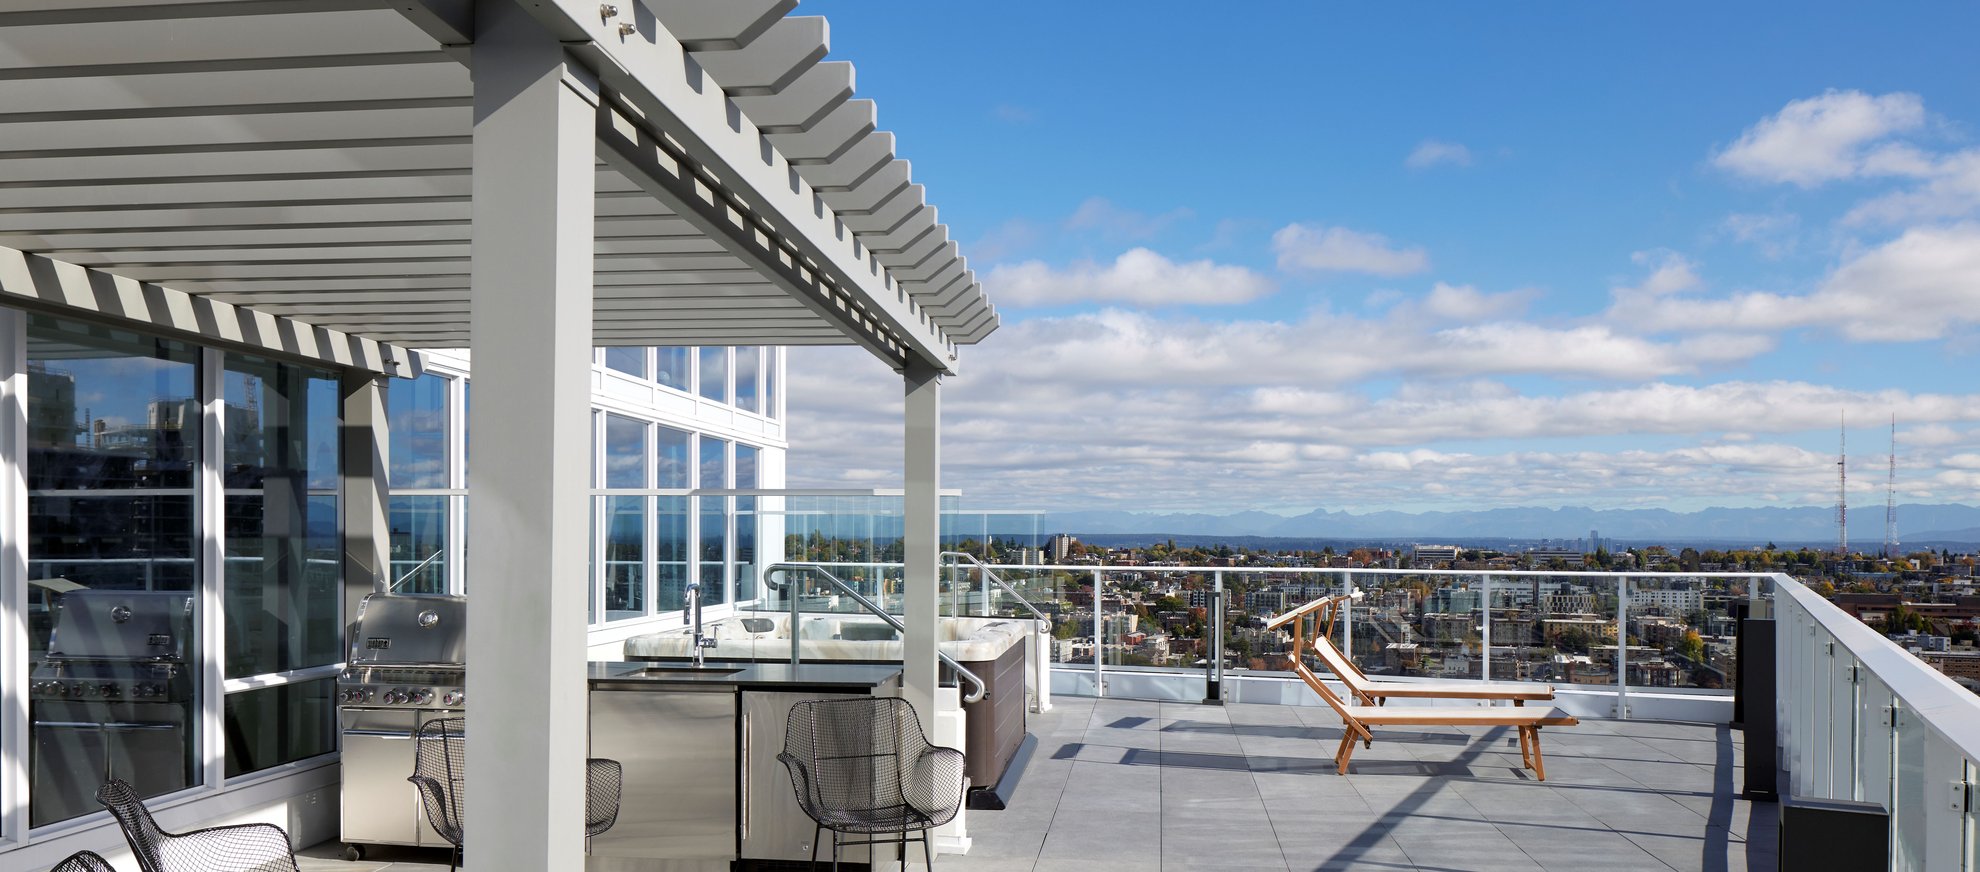 spacious outdoor rooftop terrace with seating options, outdoor kitchen, city view at the penthouse level seattle south lake union.jpg